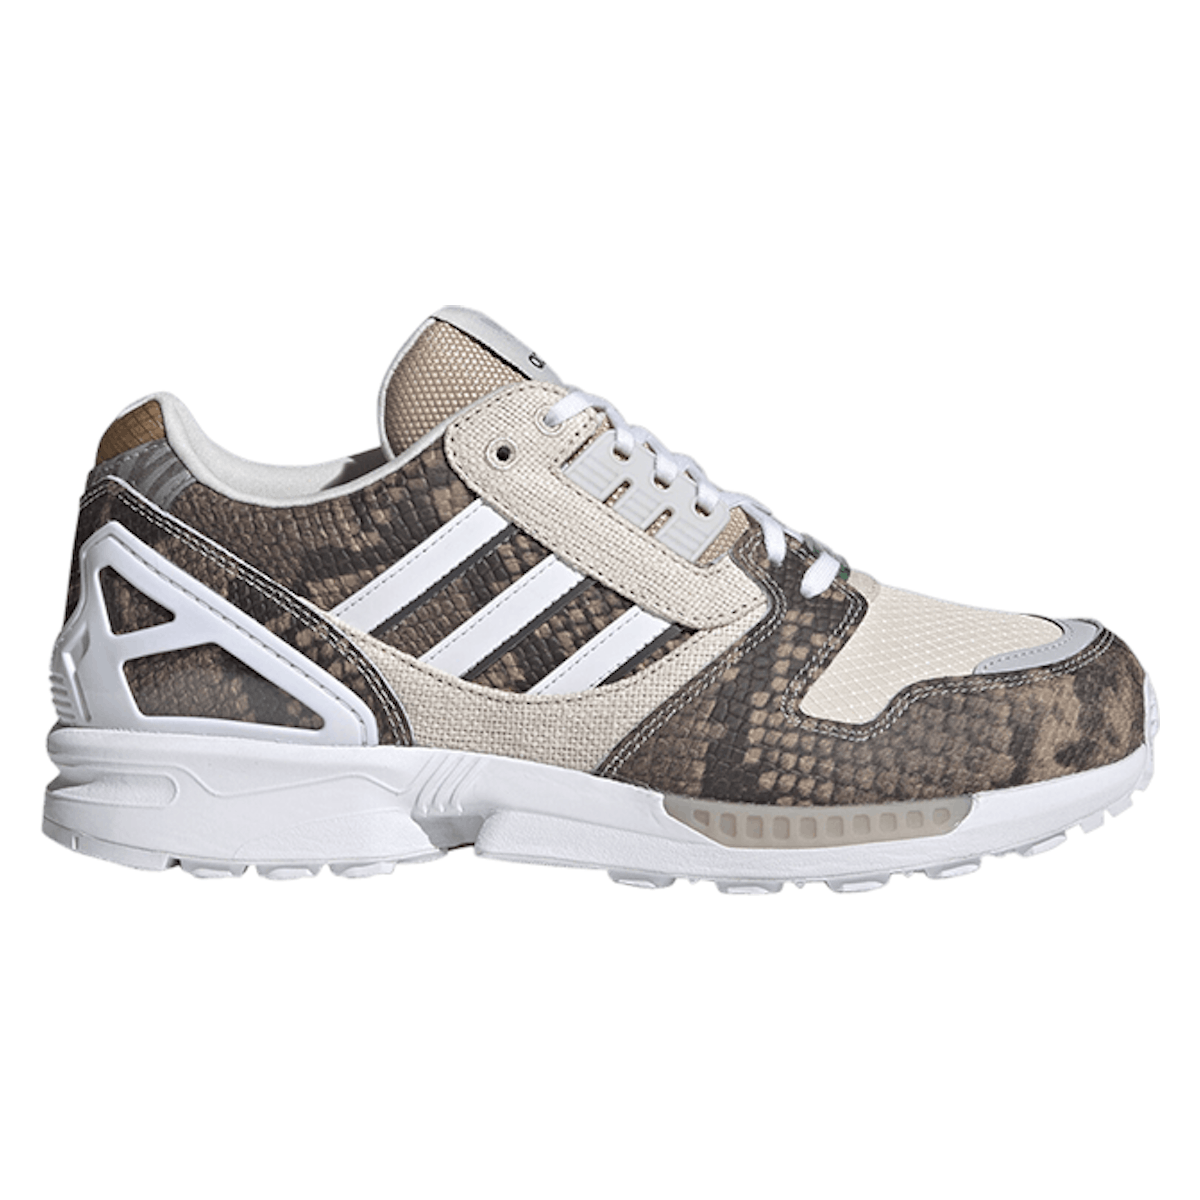 Adidas ZX 8000 Lethal Nights "Snake"